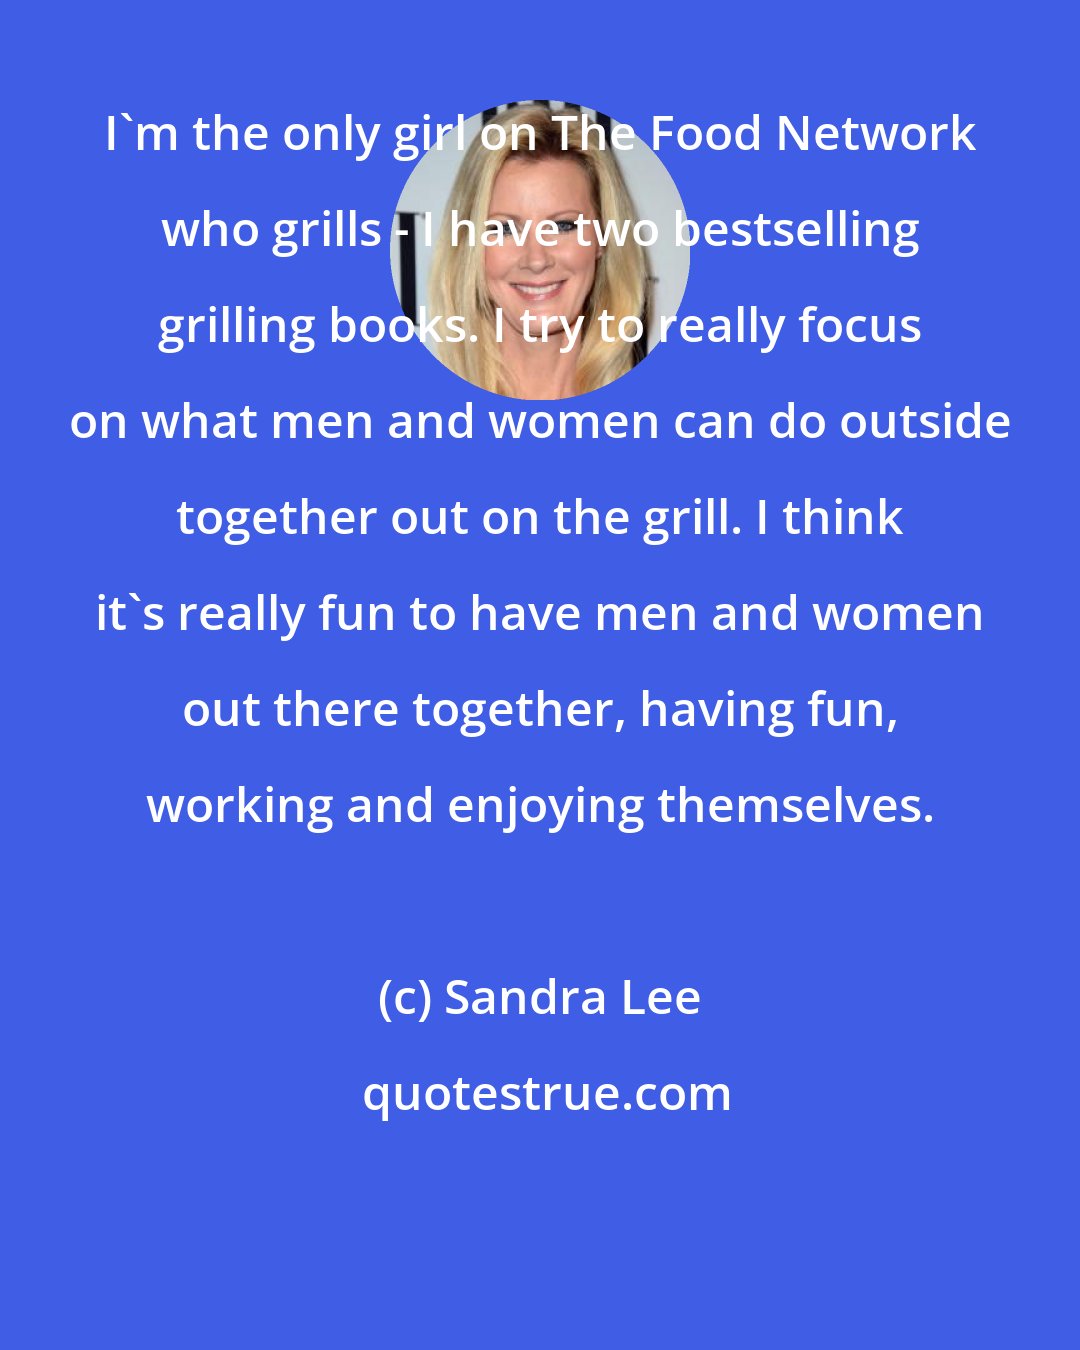 Sandra Lee: I'm the only girl on The Food Network who grills - I have two bestselling grilling books. I try to really focus on what men and women can do outside together out on the grill. I think it's really fun to have men and women out there together, having fun, working and enjoying themselves.